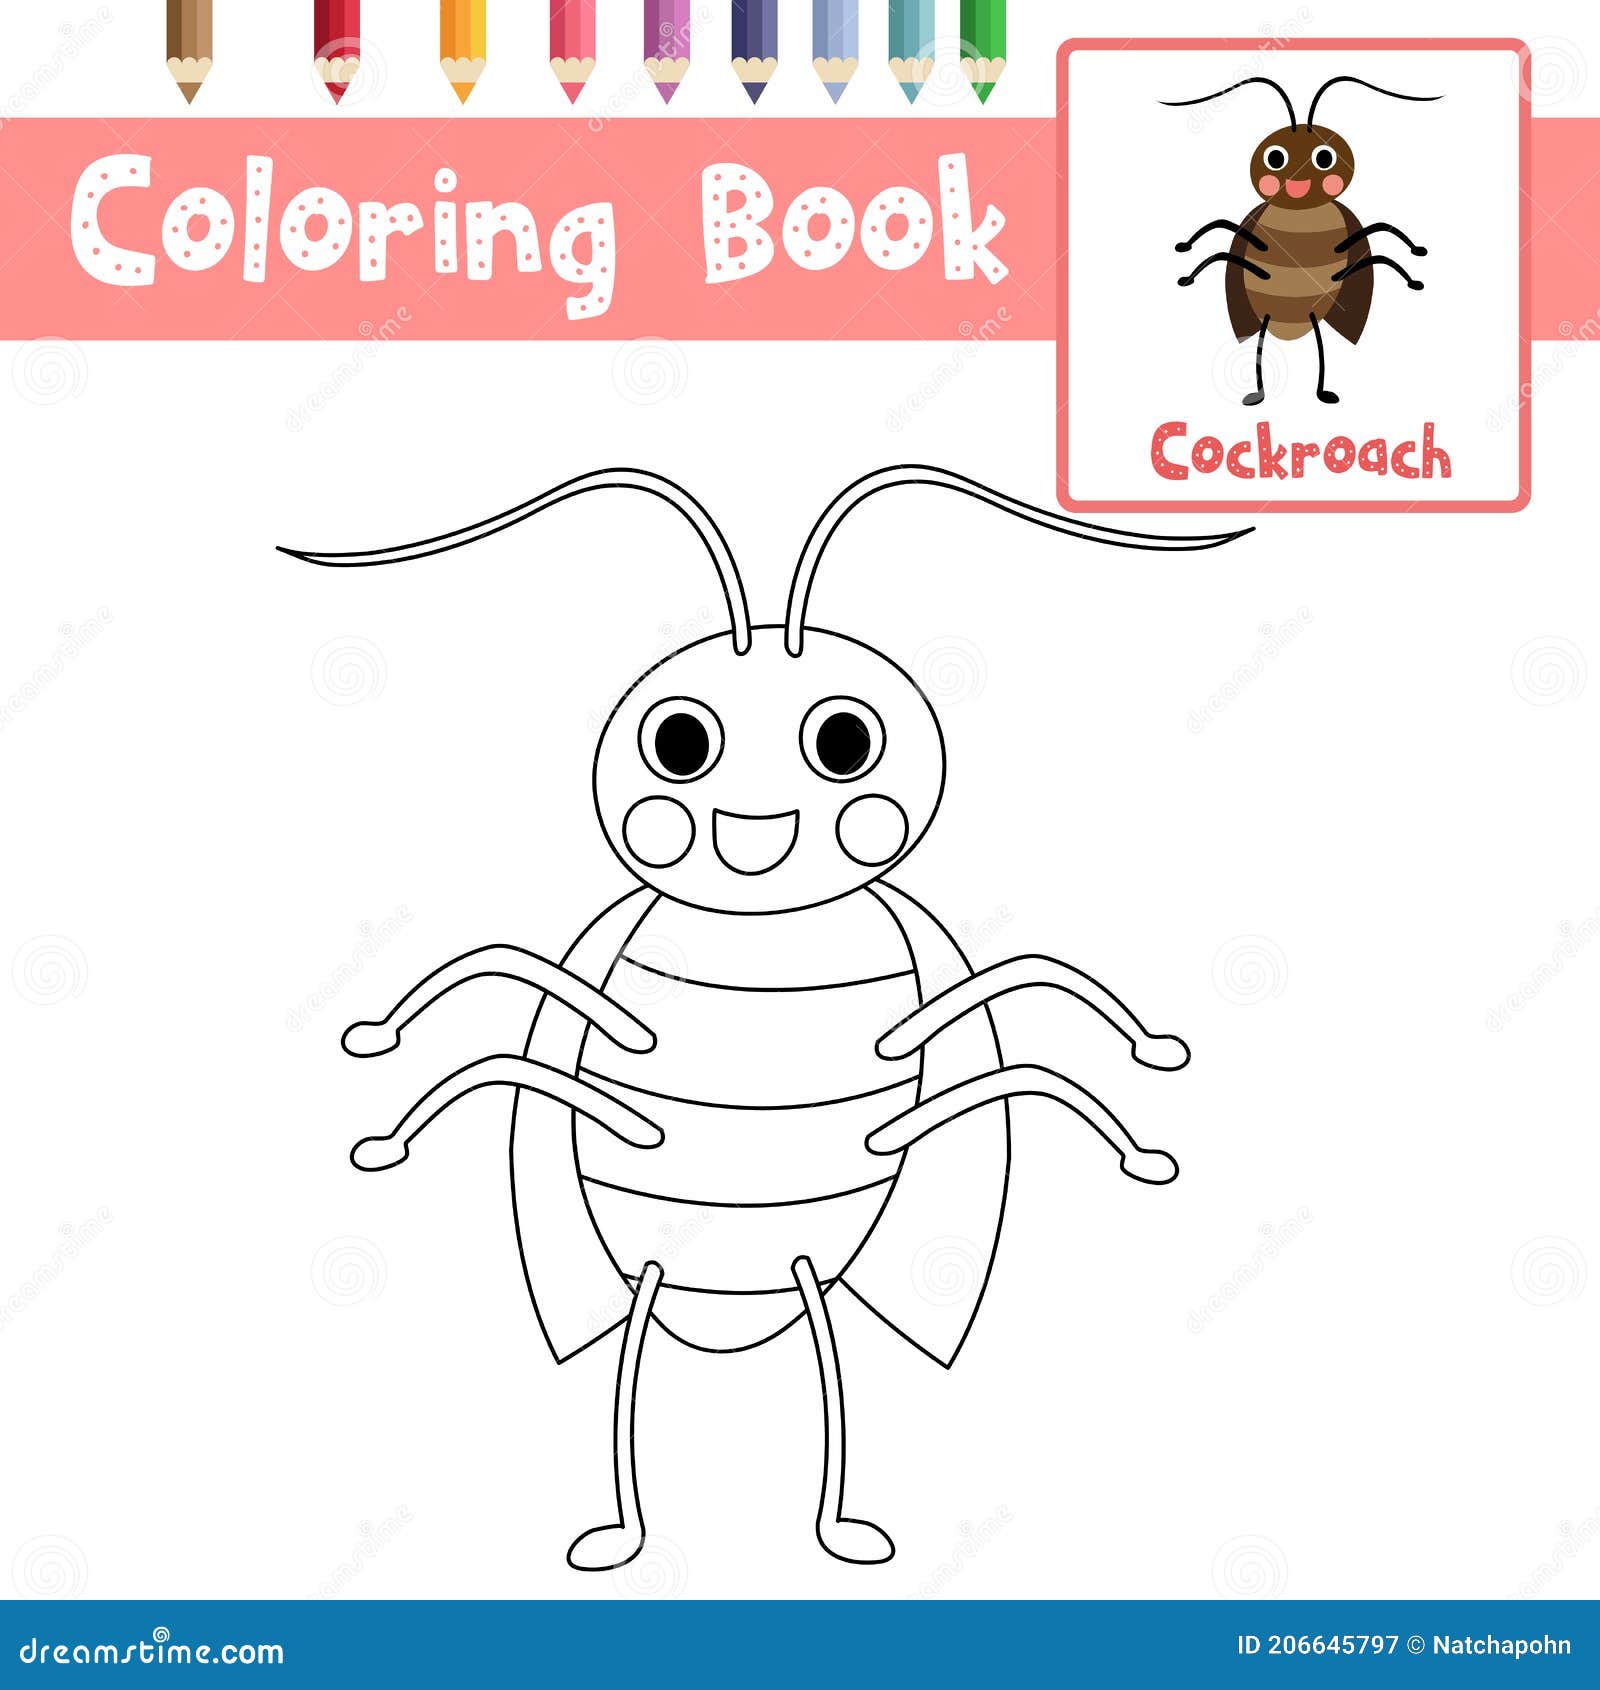 Coloring Page Cockroach Animal Cartoon Character Vector Illustration ...